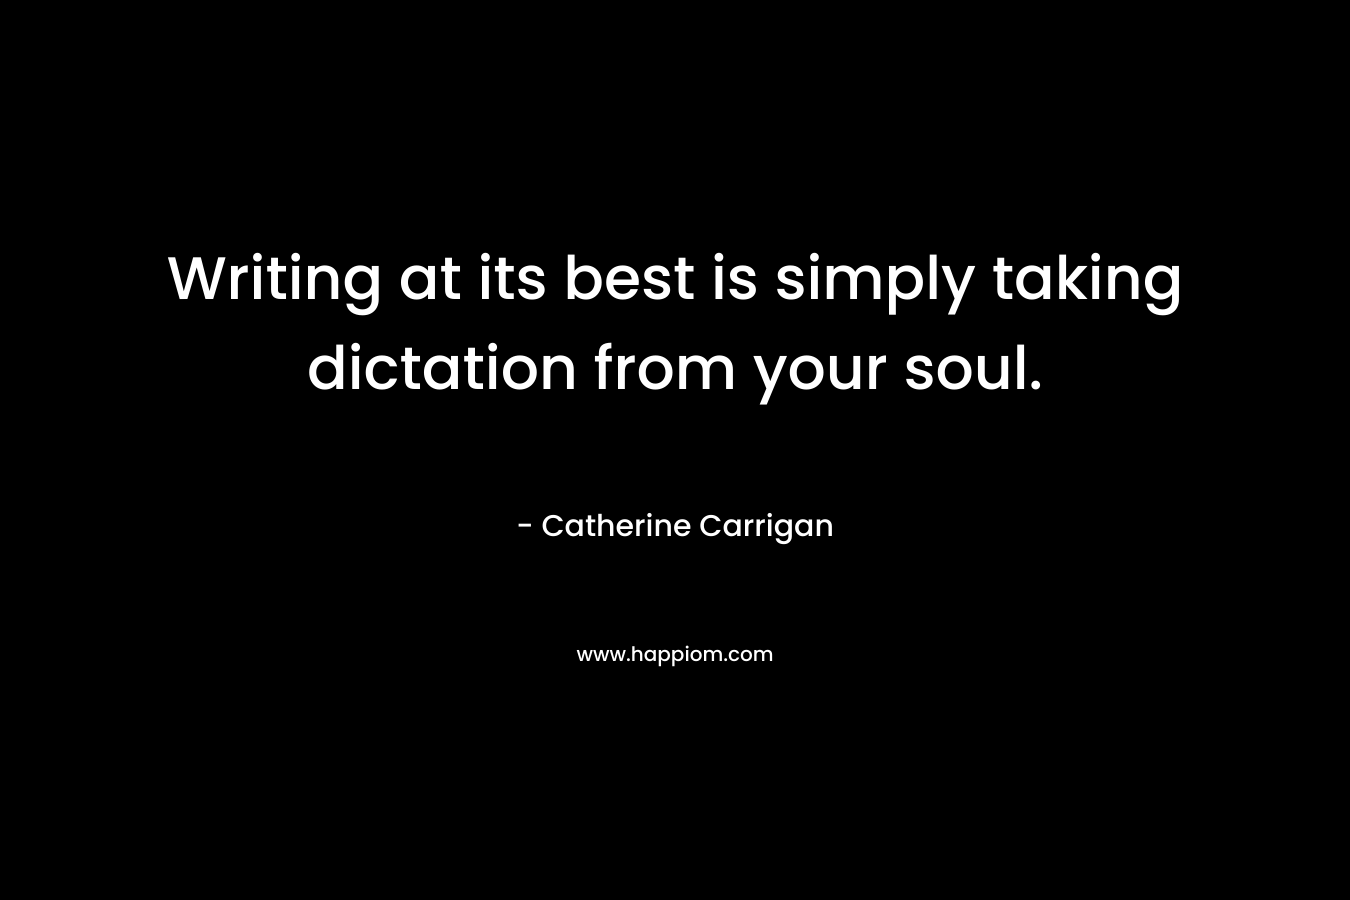 Writing at its best is simply taking dictation from your soul. – Catherine Carrigan